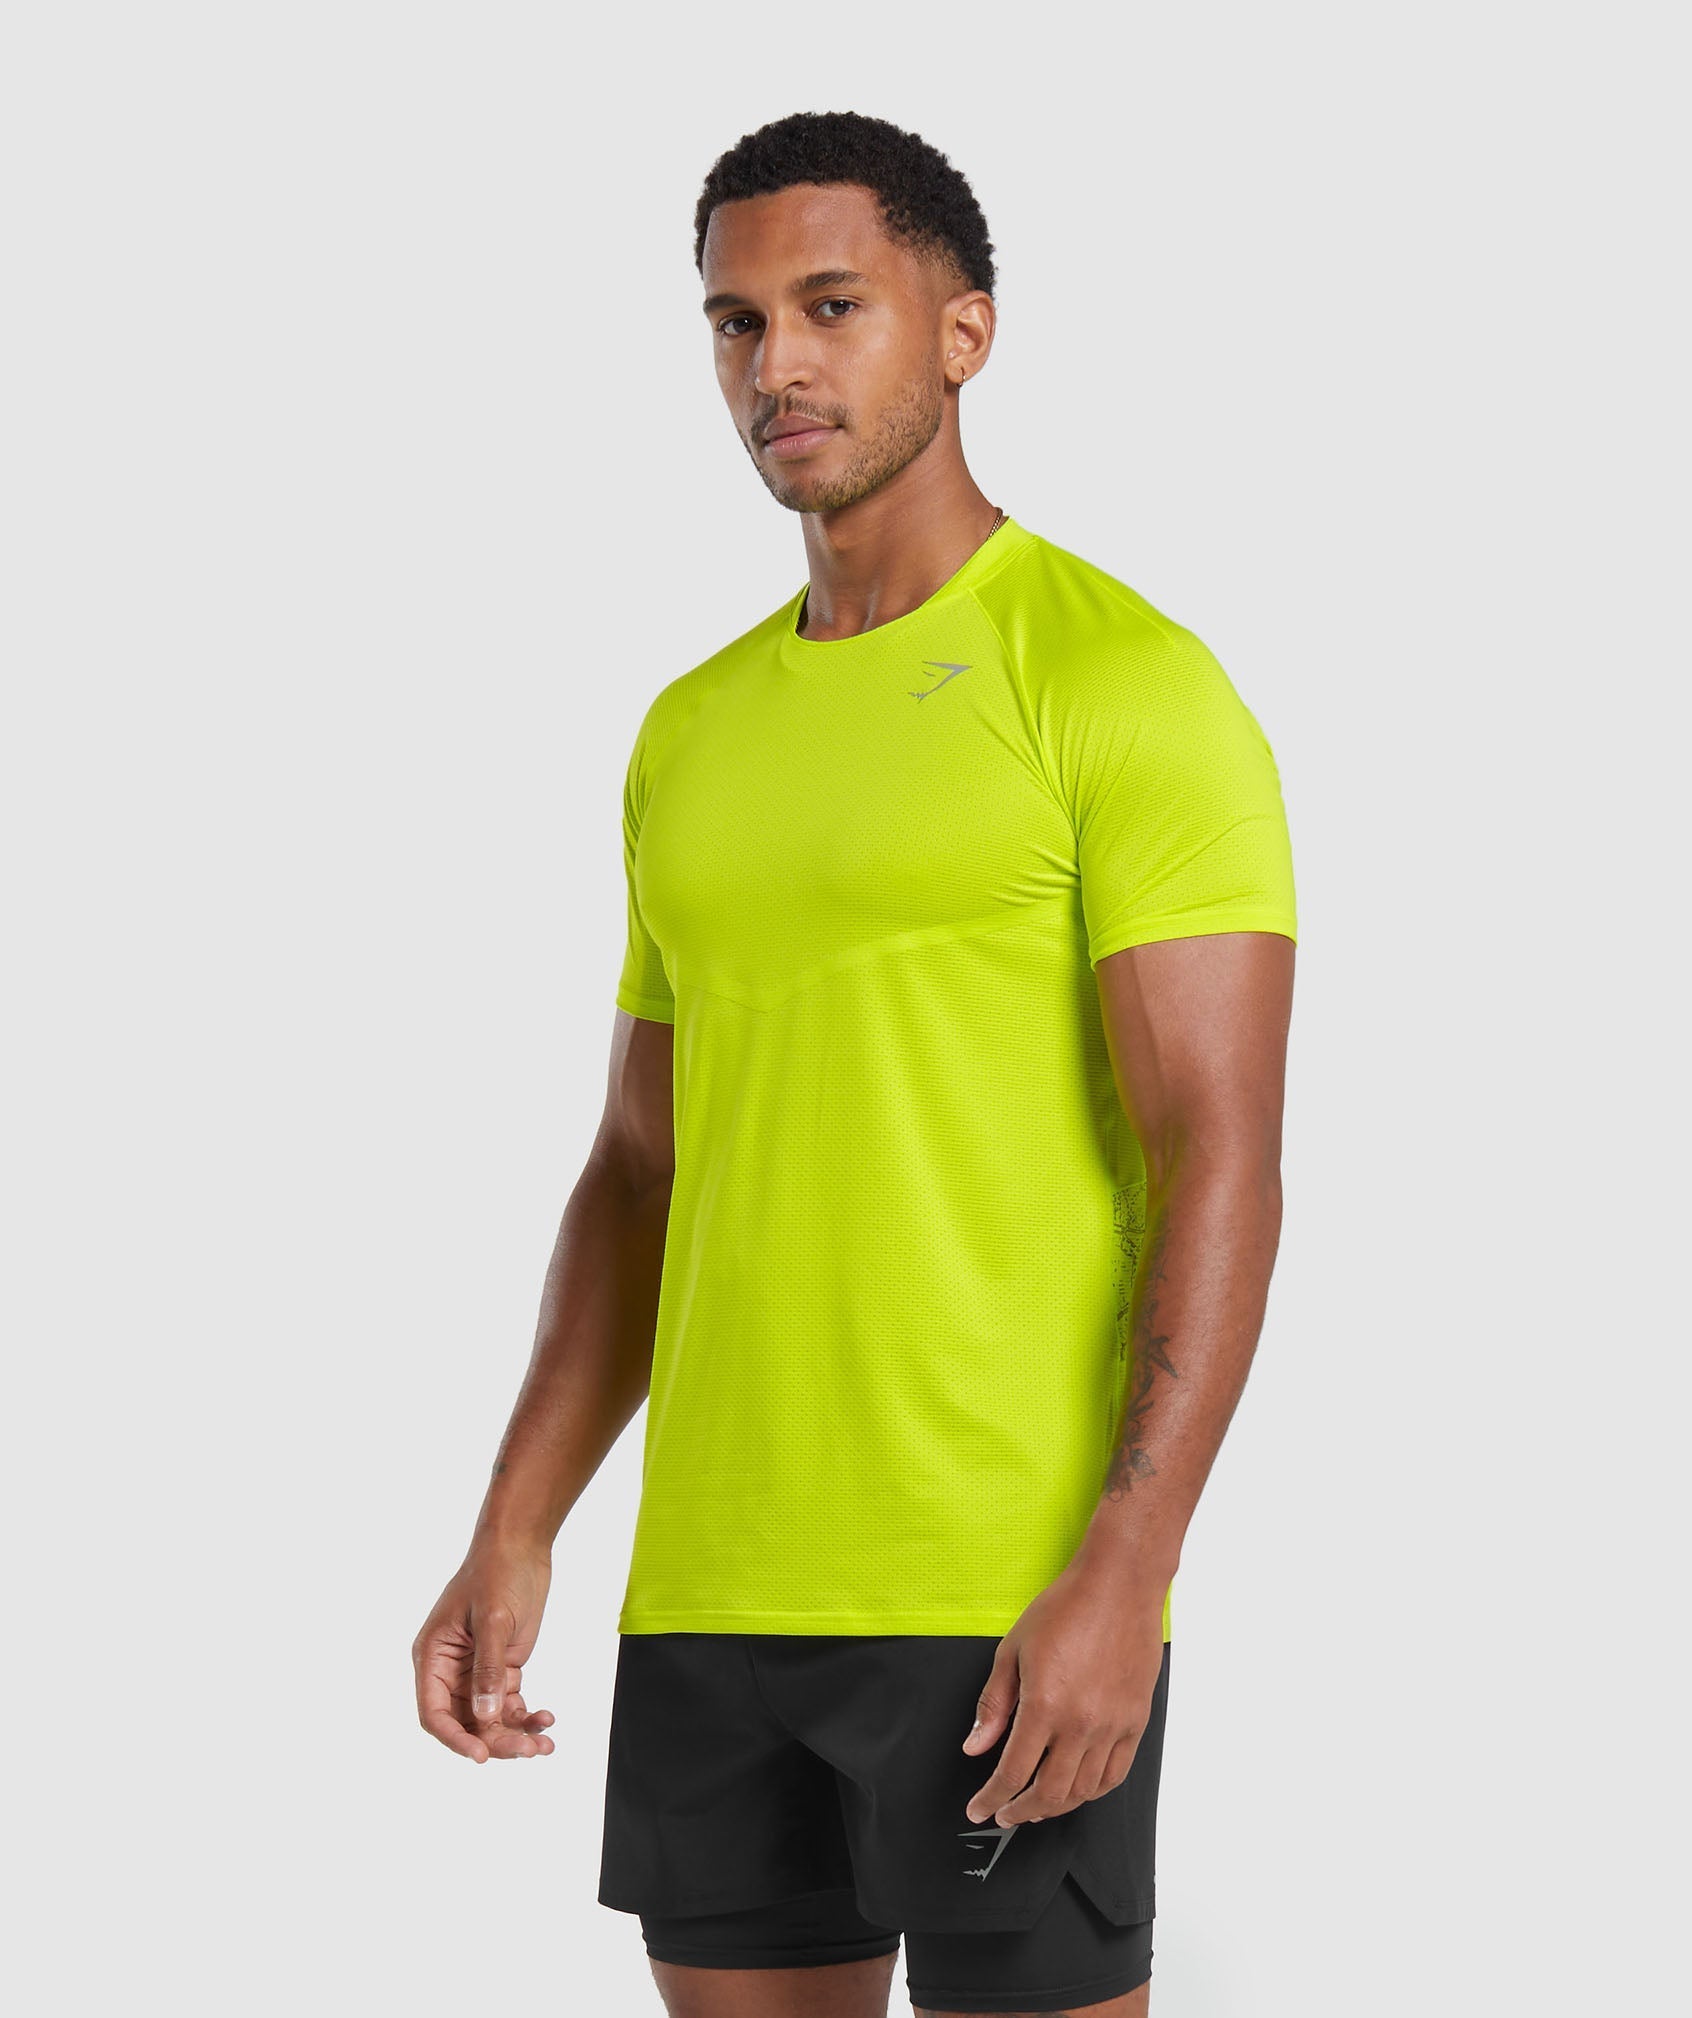 Speed T-Shirt in Fluo Speed Green - view 4